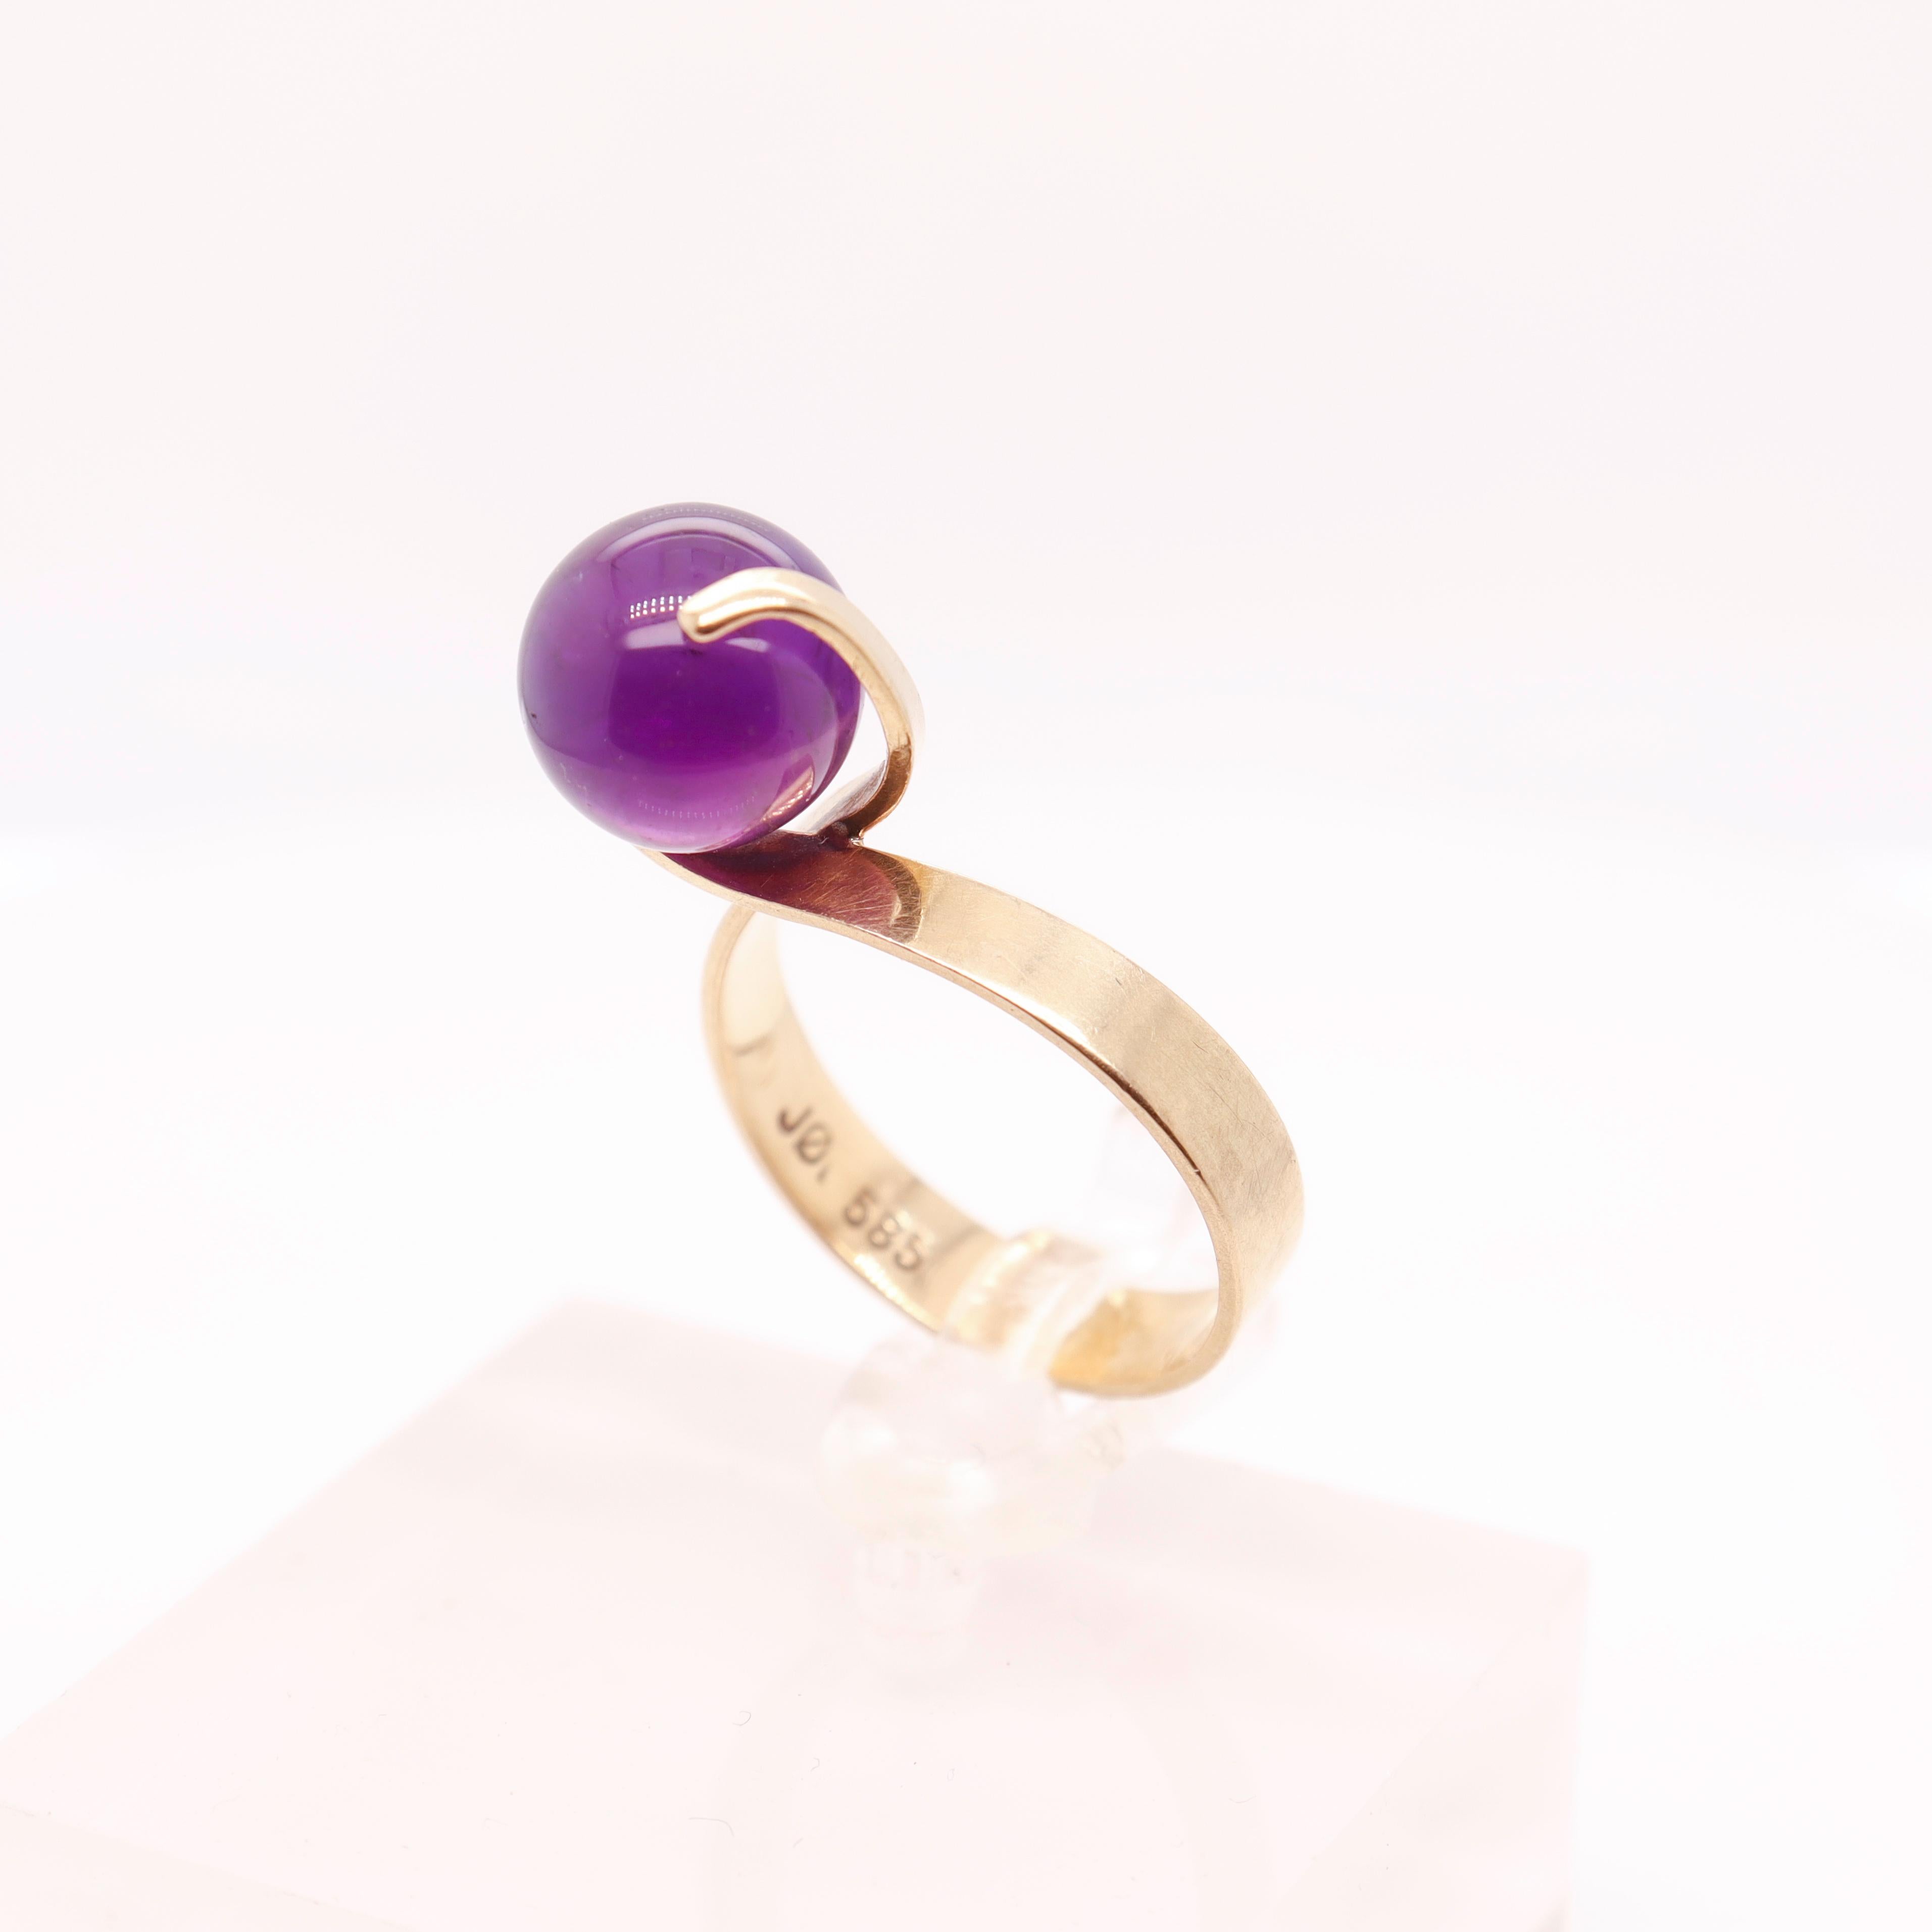 A fine signed Danish modern gold & amethyst ring 

In 14k gold.

By Jørgen Larsen.

With a spherical amethyst gemstone bead. We believe this ring is meant to hold any spherical gemstone bead of the same size (10mm).

Simply wonderful Danish Modern